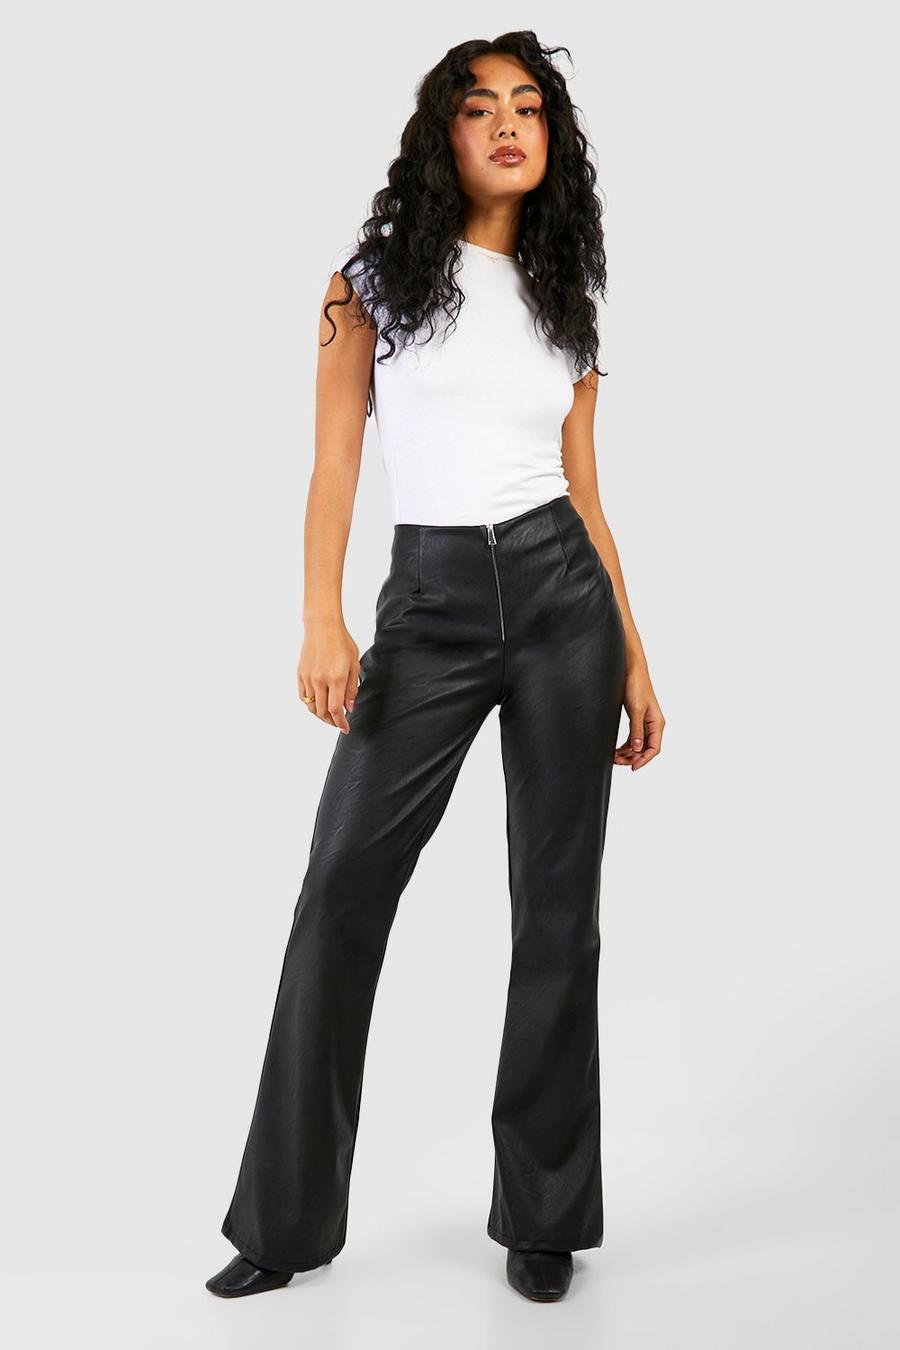 Black Leather Look Zip Front Flare Pants image number 1